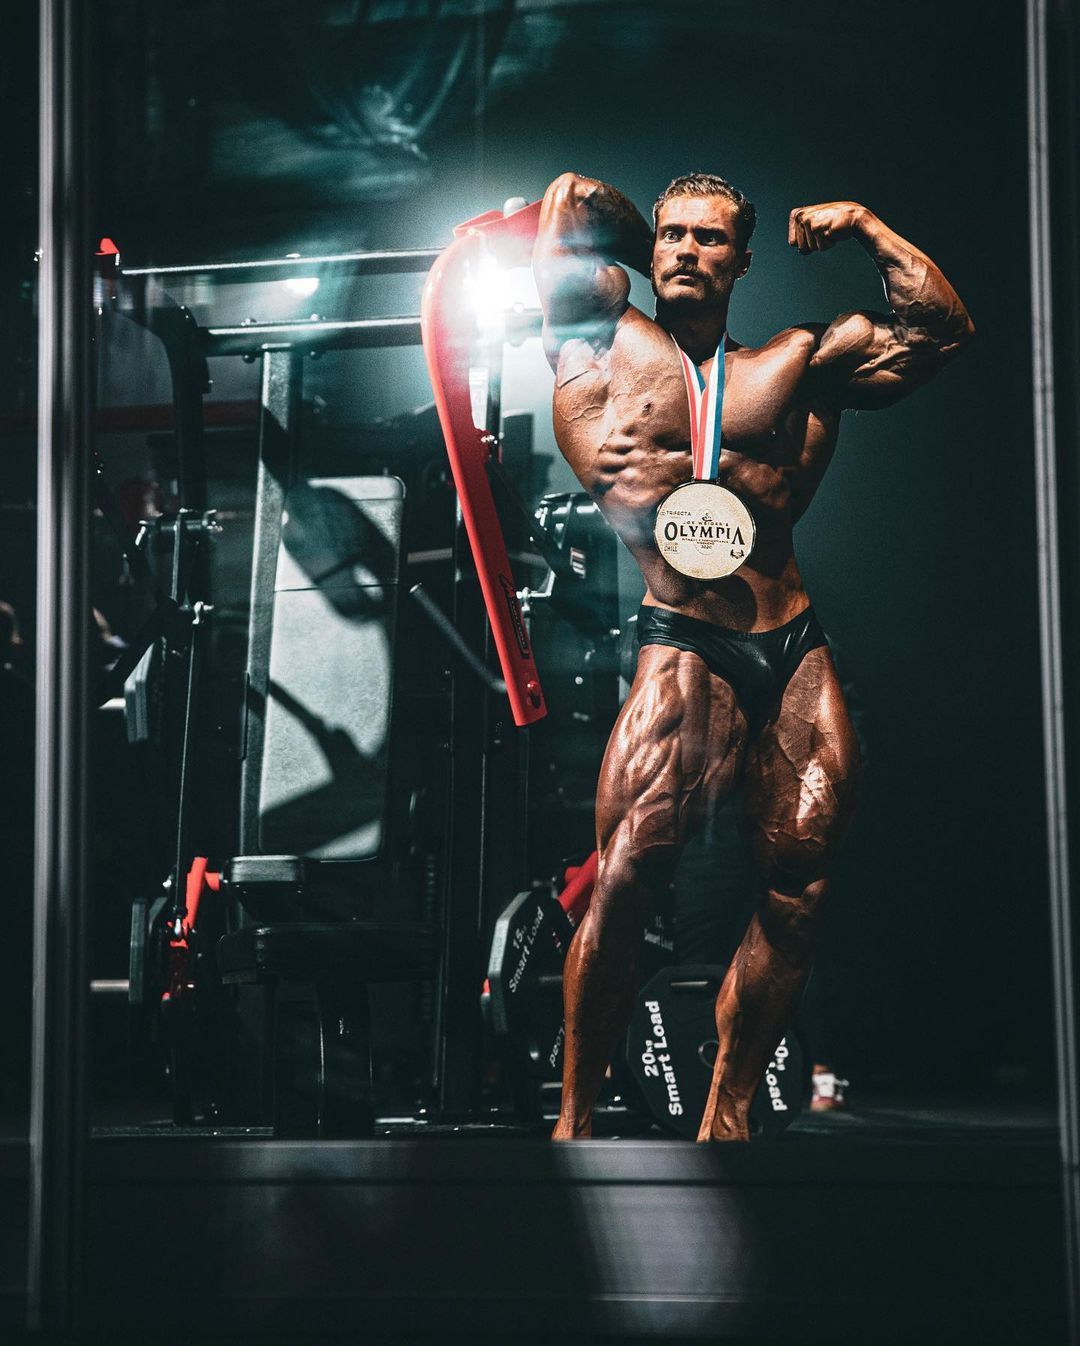 Chris Bumstead on Instagram: “Chasing something special